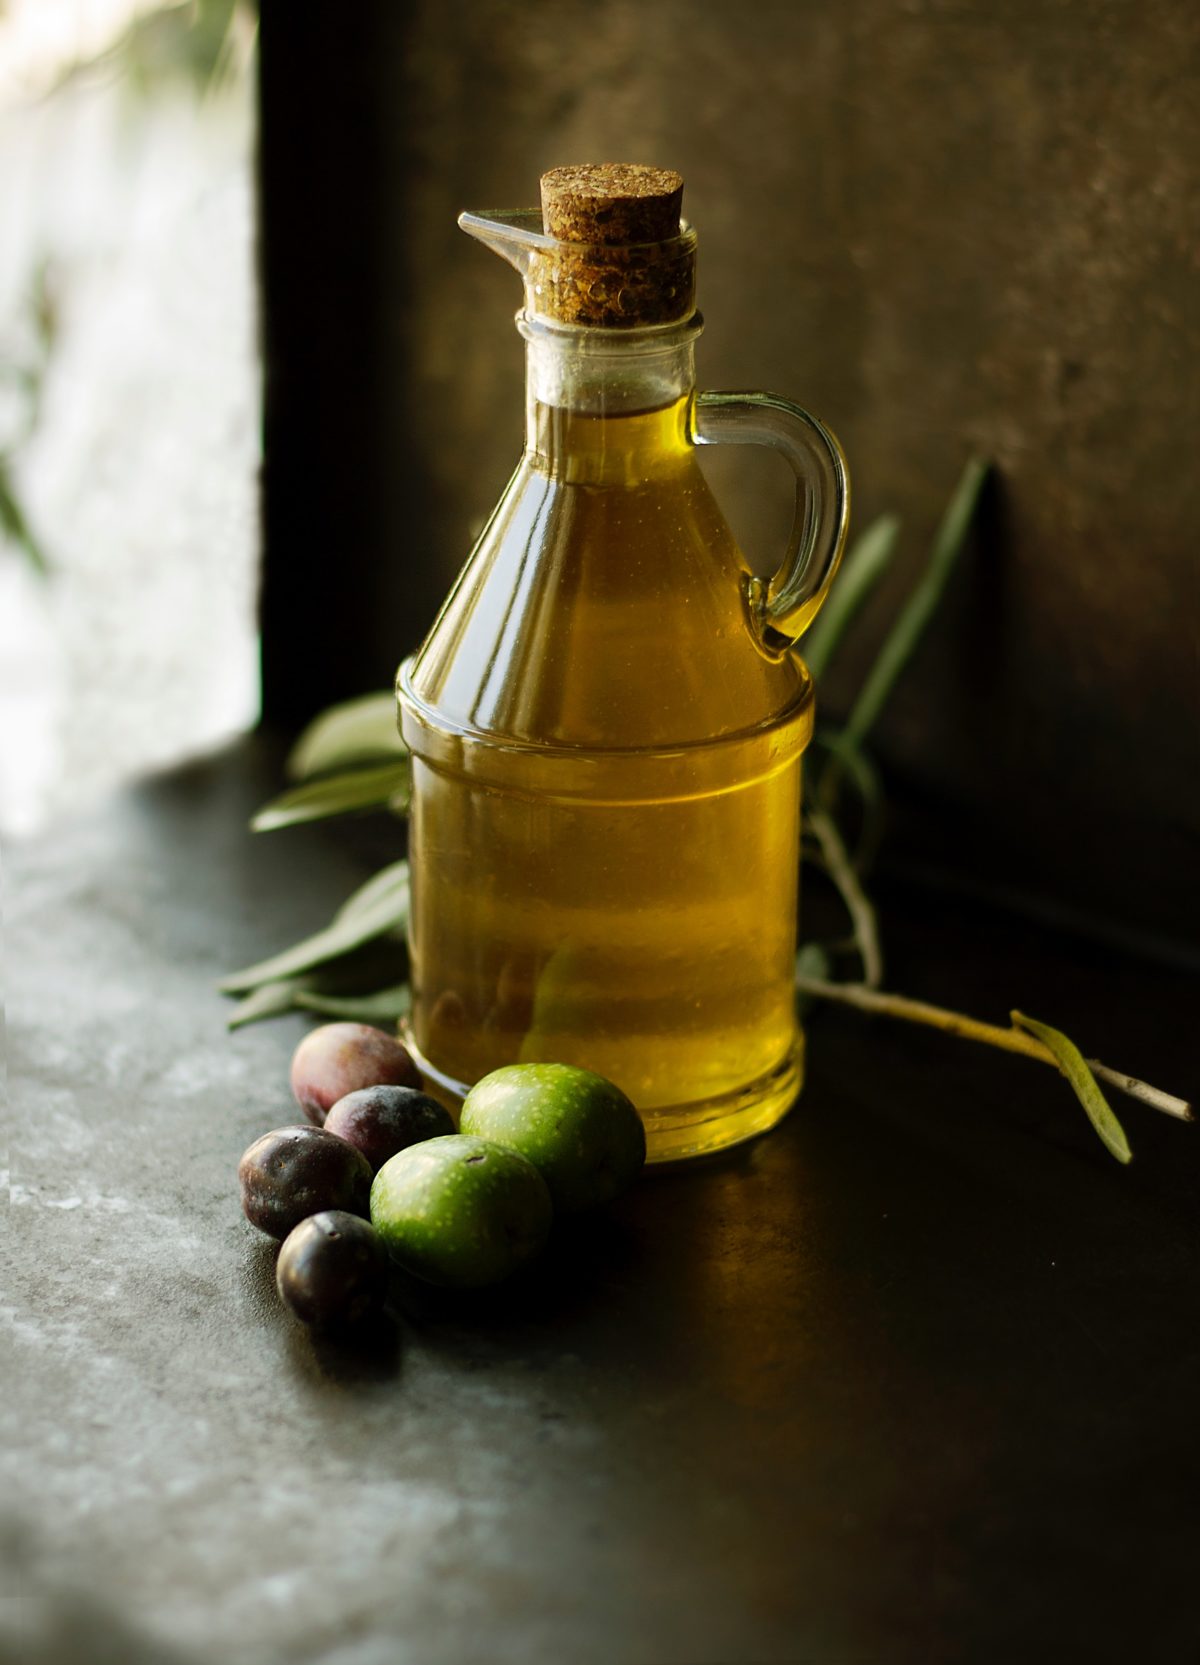 A clear glass bottle of olive oil on a dark tabletop next to a handful of olives.